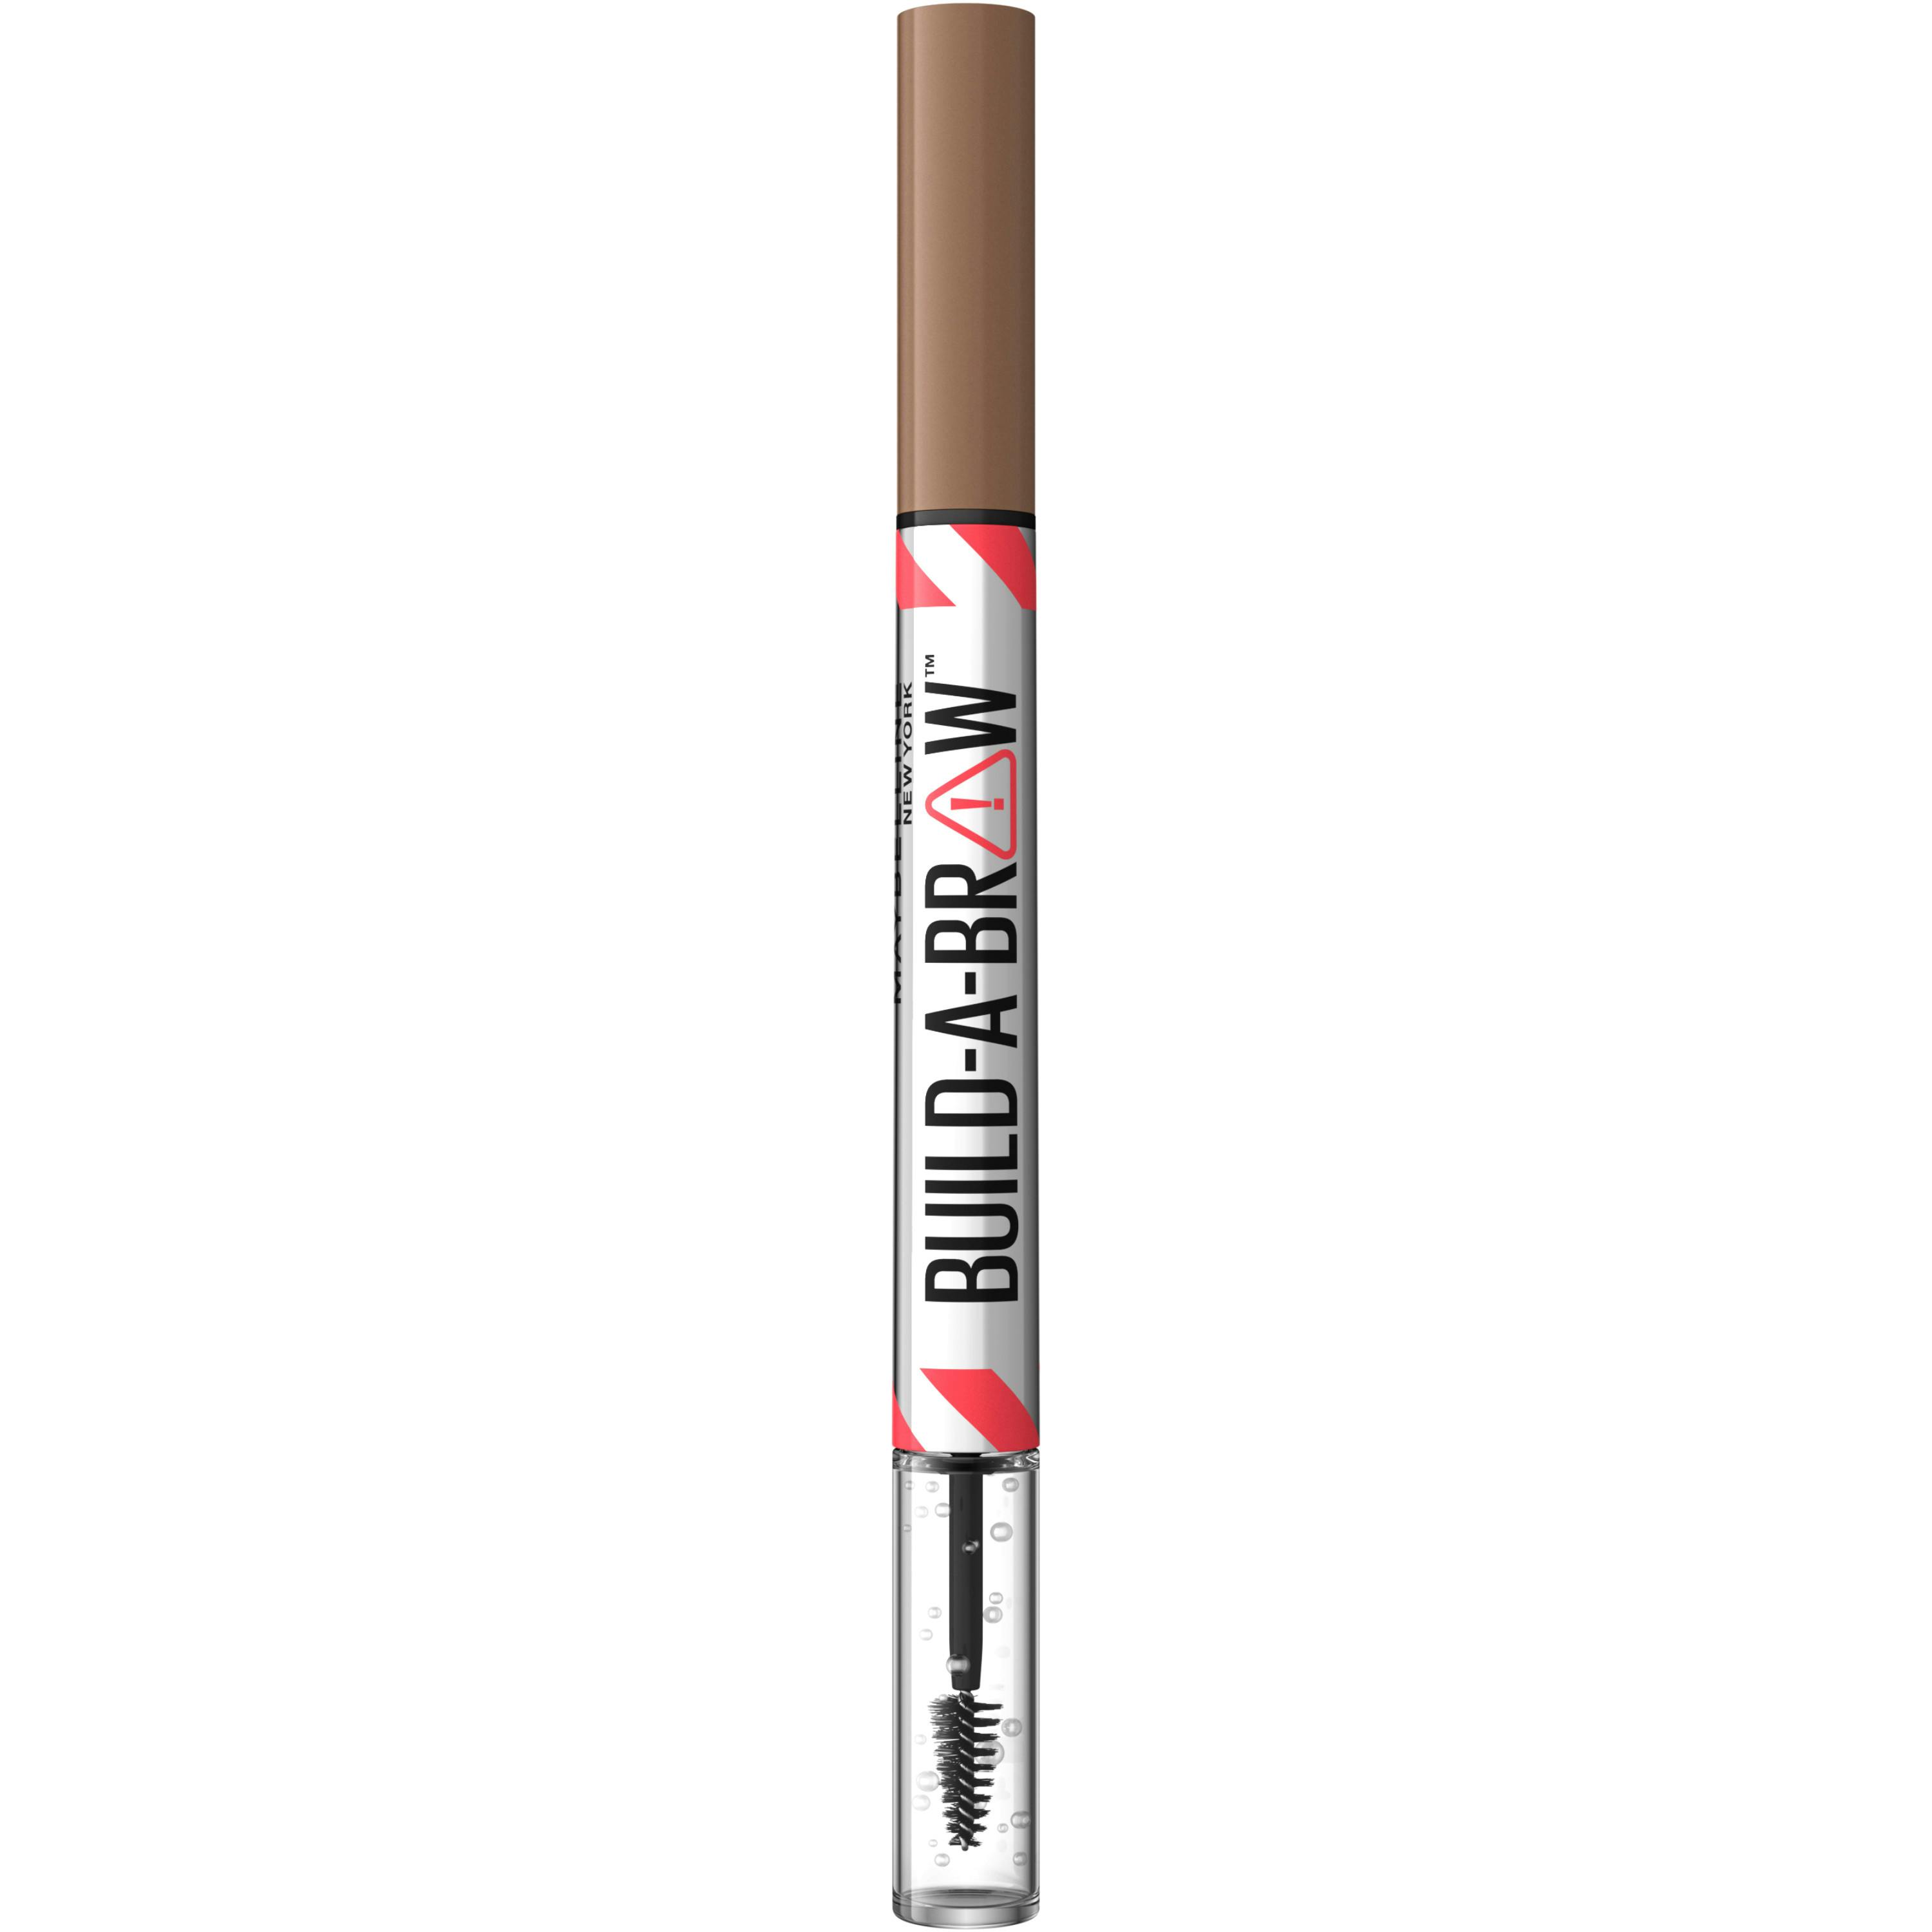 Maybelline Build-A-Brow 2 Easy Steps Eye Brow Pencil and Gel (Various Shades) - Soft Brown